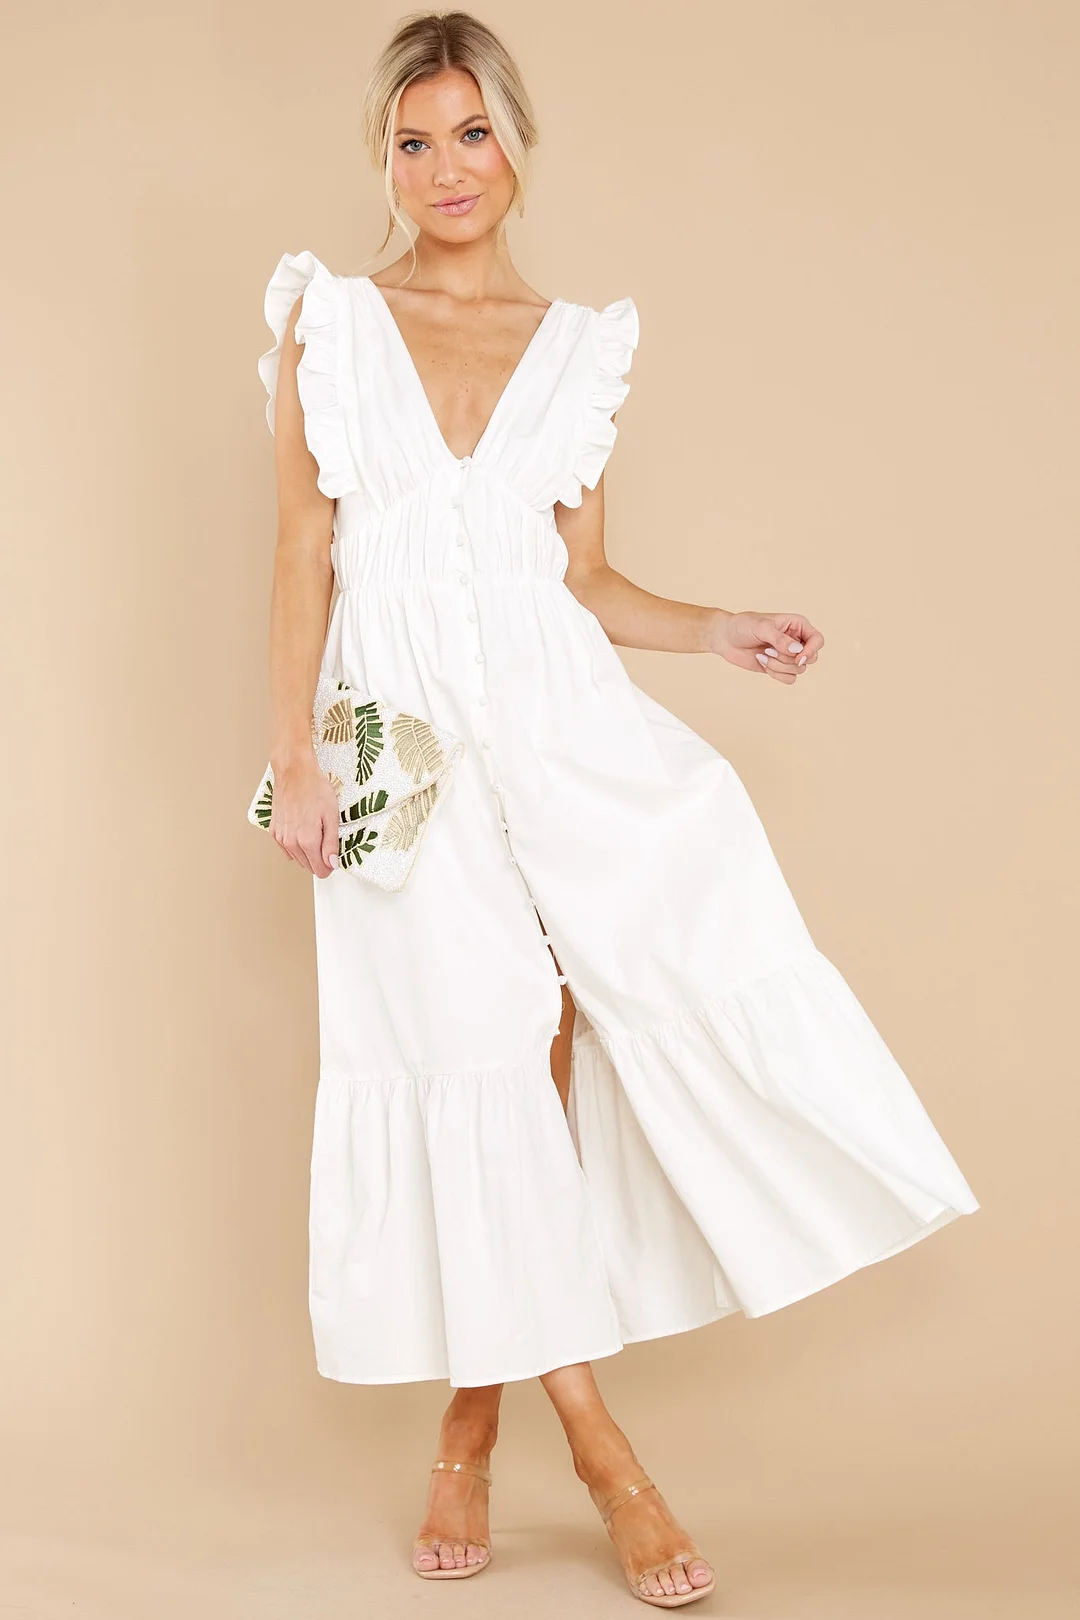 Linked By Love White Dress